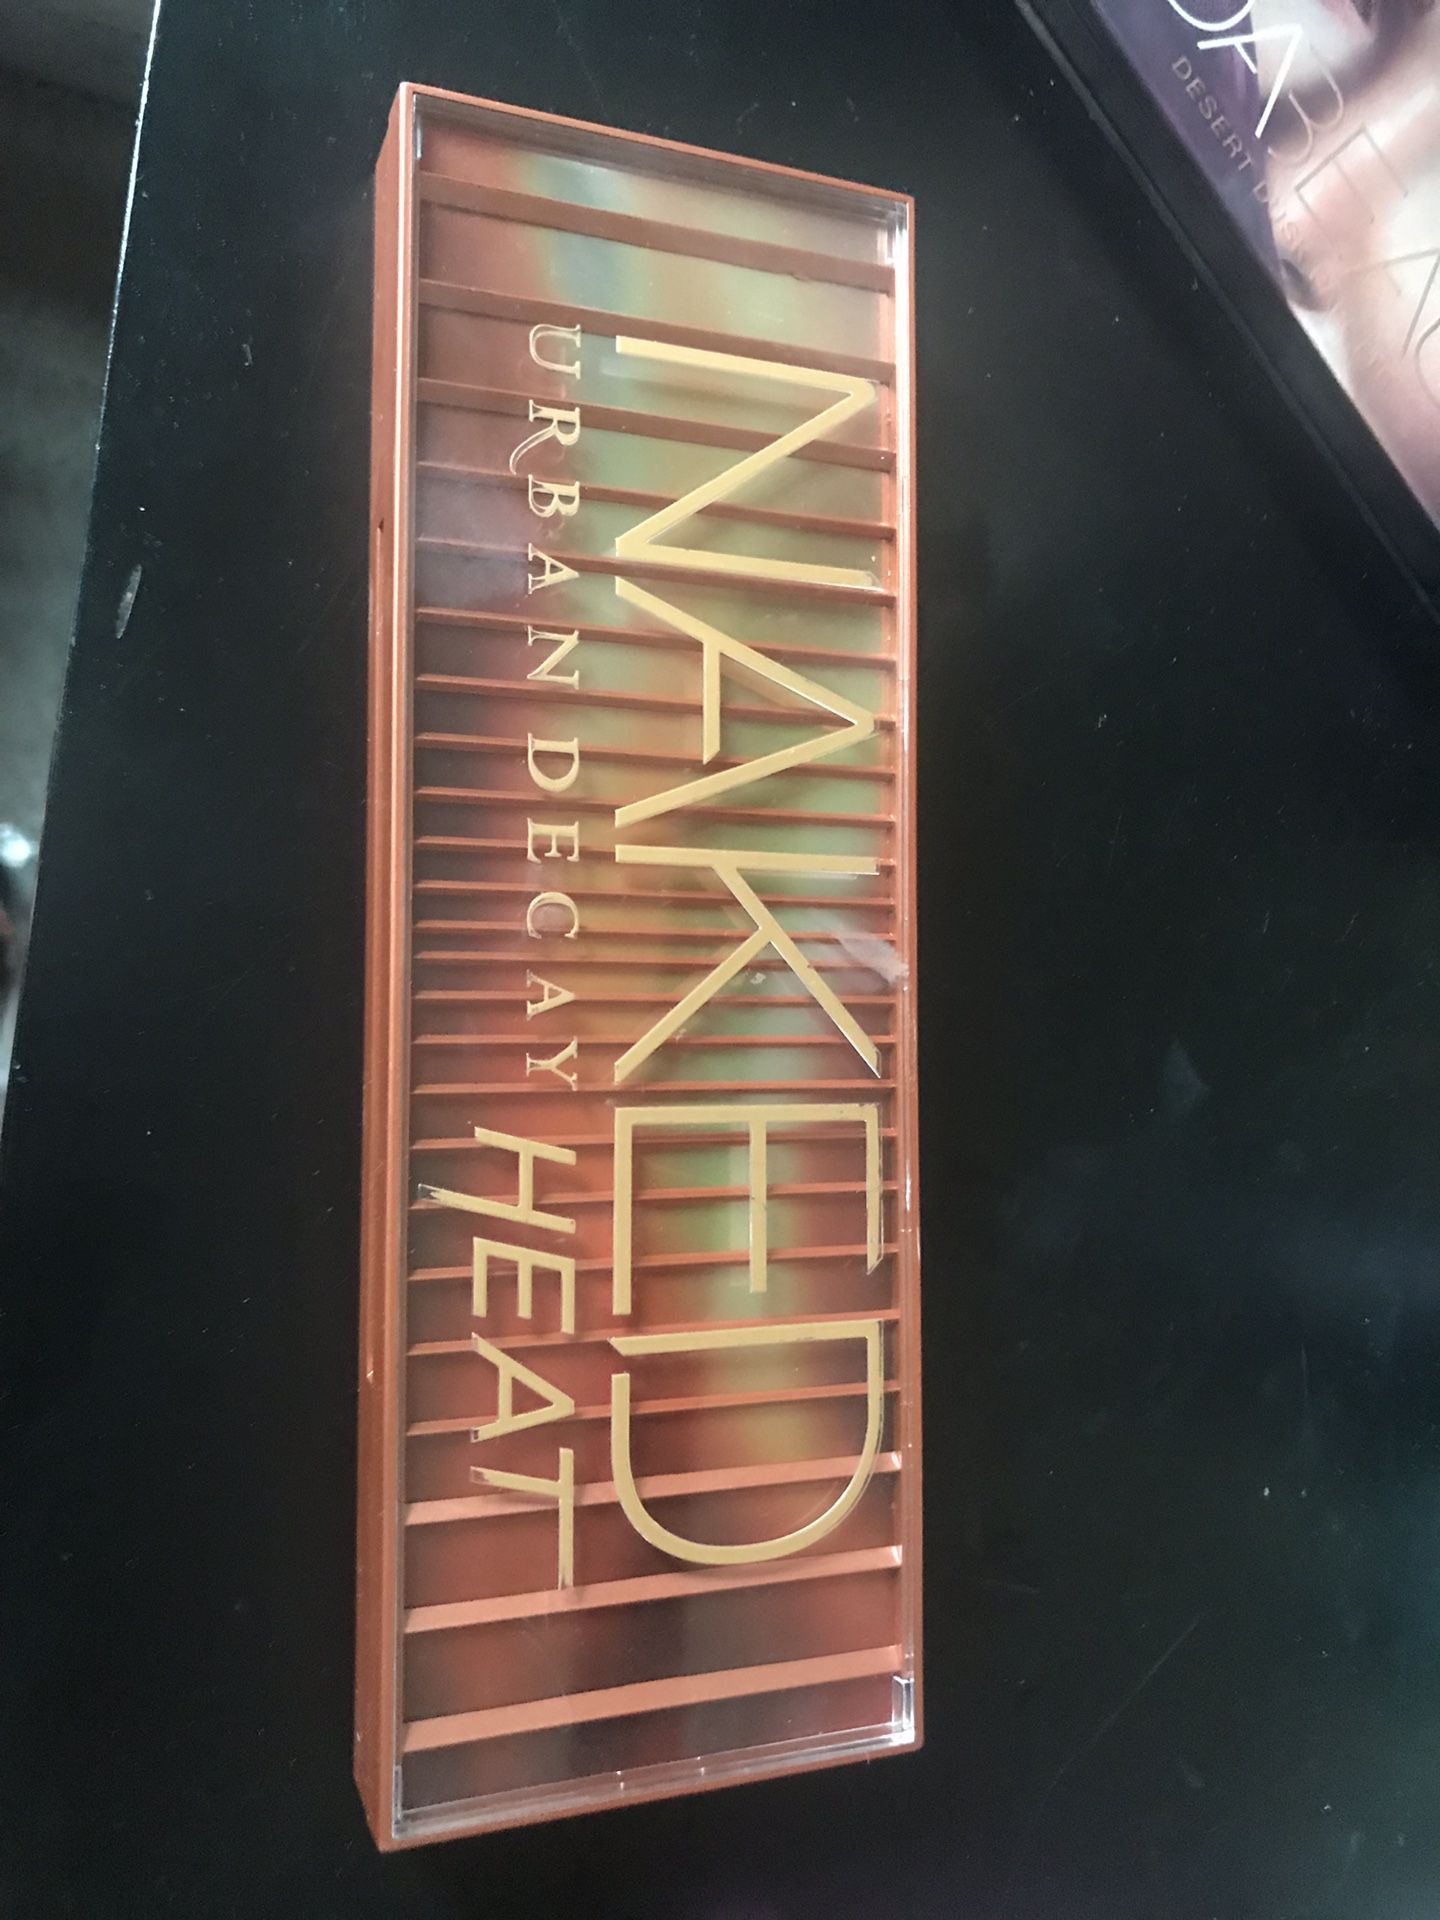 Urban decay naked makeup palette